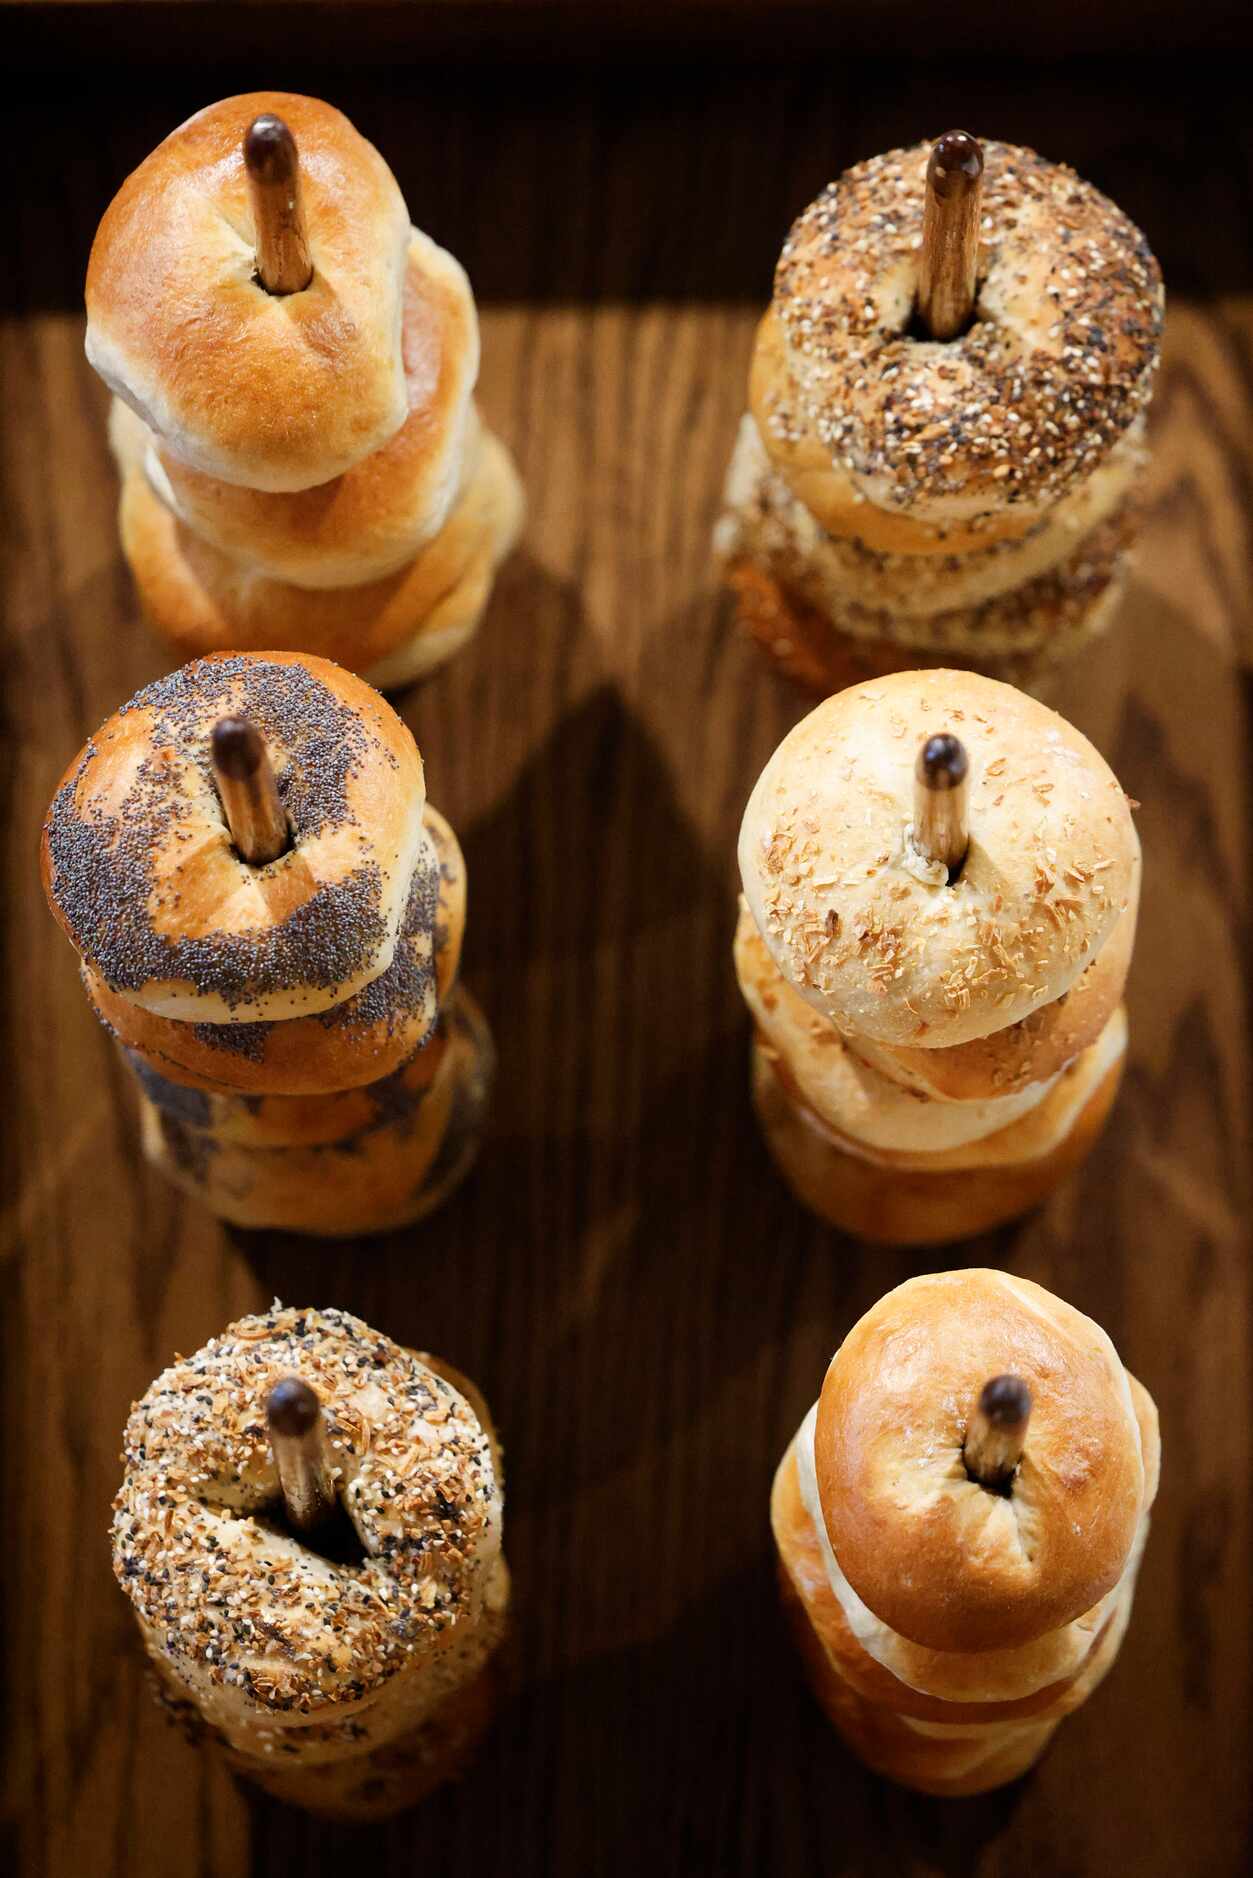 Bagels at Trades Delicatessen in Dallas are displayed on pegs (pictured) or in baskets (not...